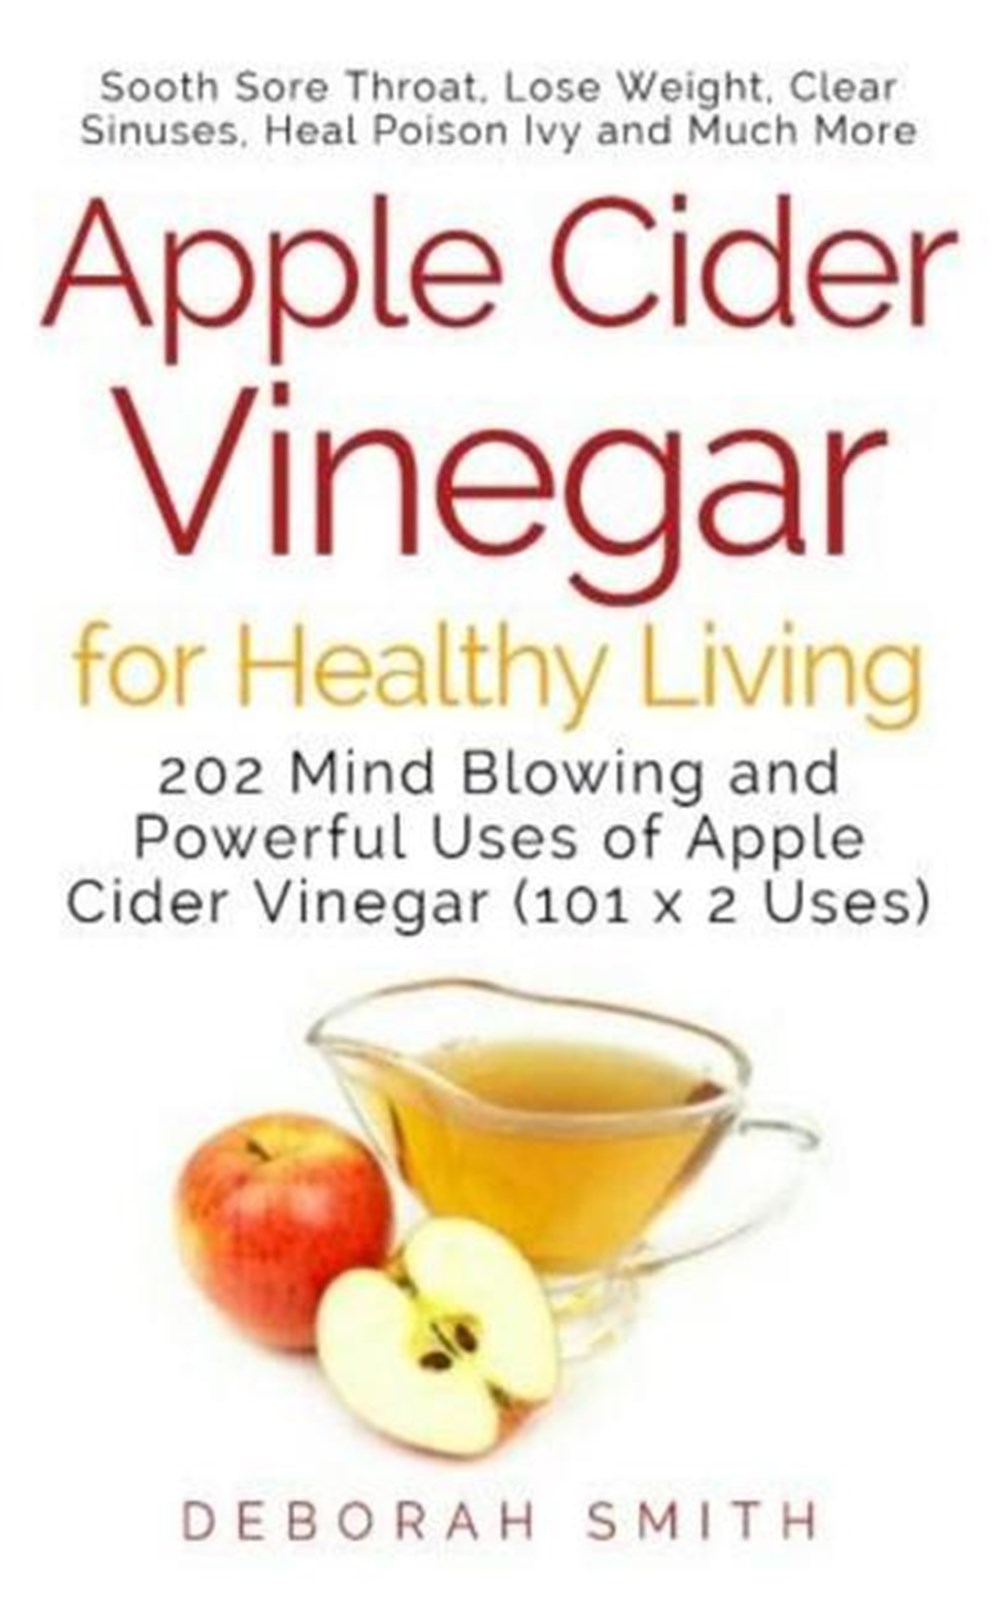 Apple Cider Vinegar for Healthy Living: 202 Mind blowing and Powerful Uses of Apple Cider Vinegar (1